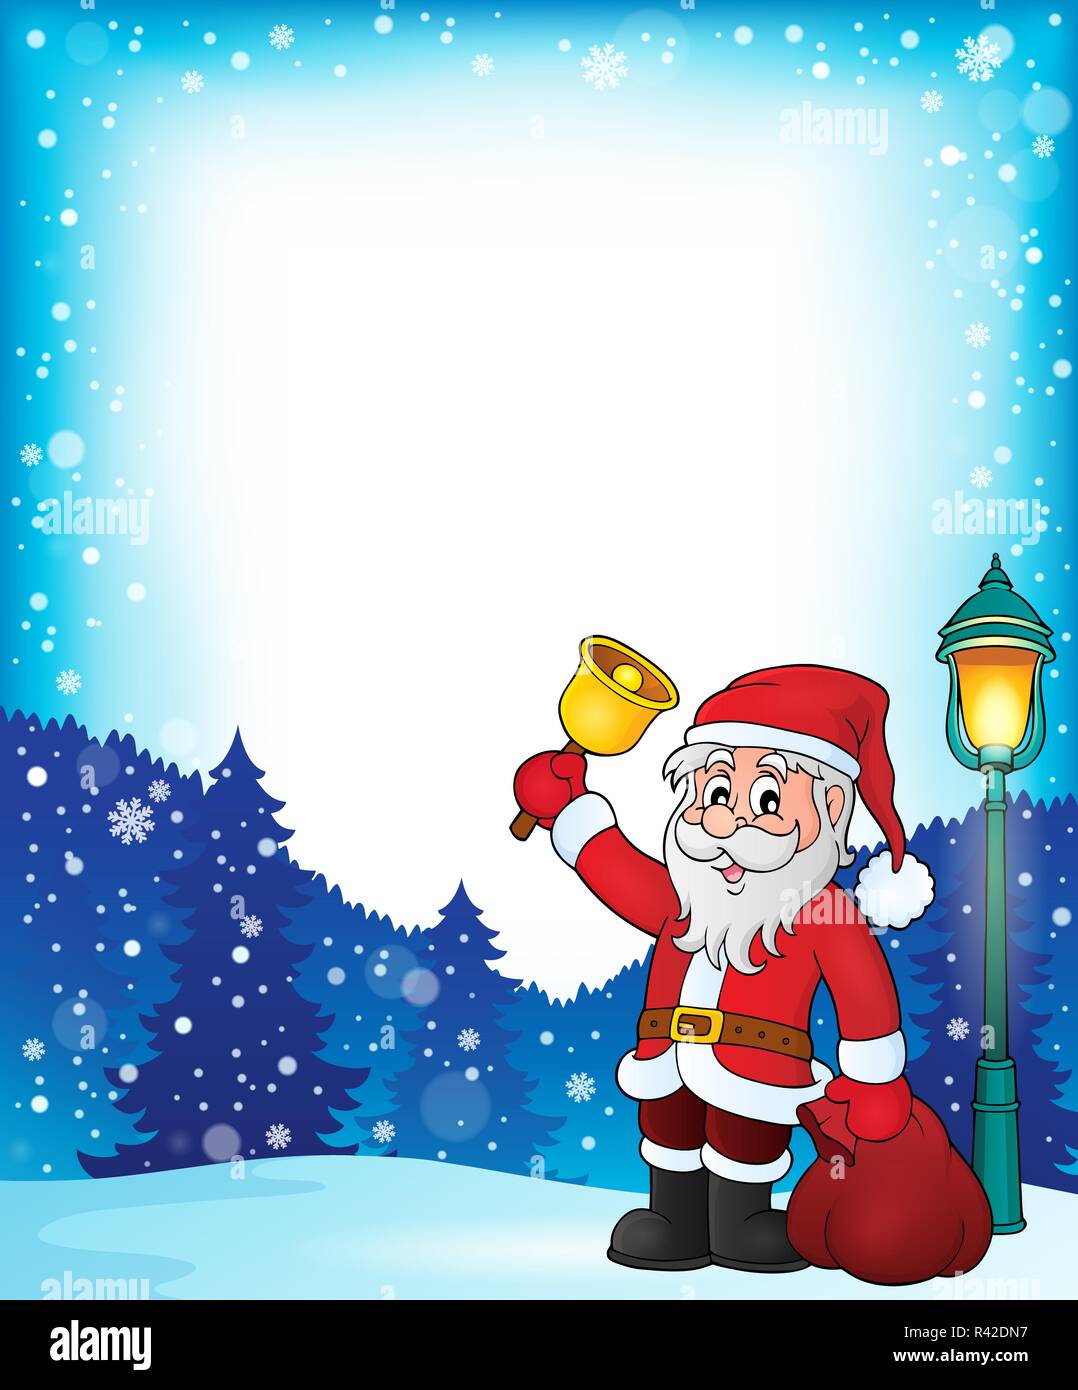 Santa Claus with bell theme frame 1 Stock Photo - Alamy